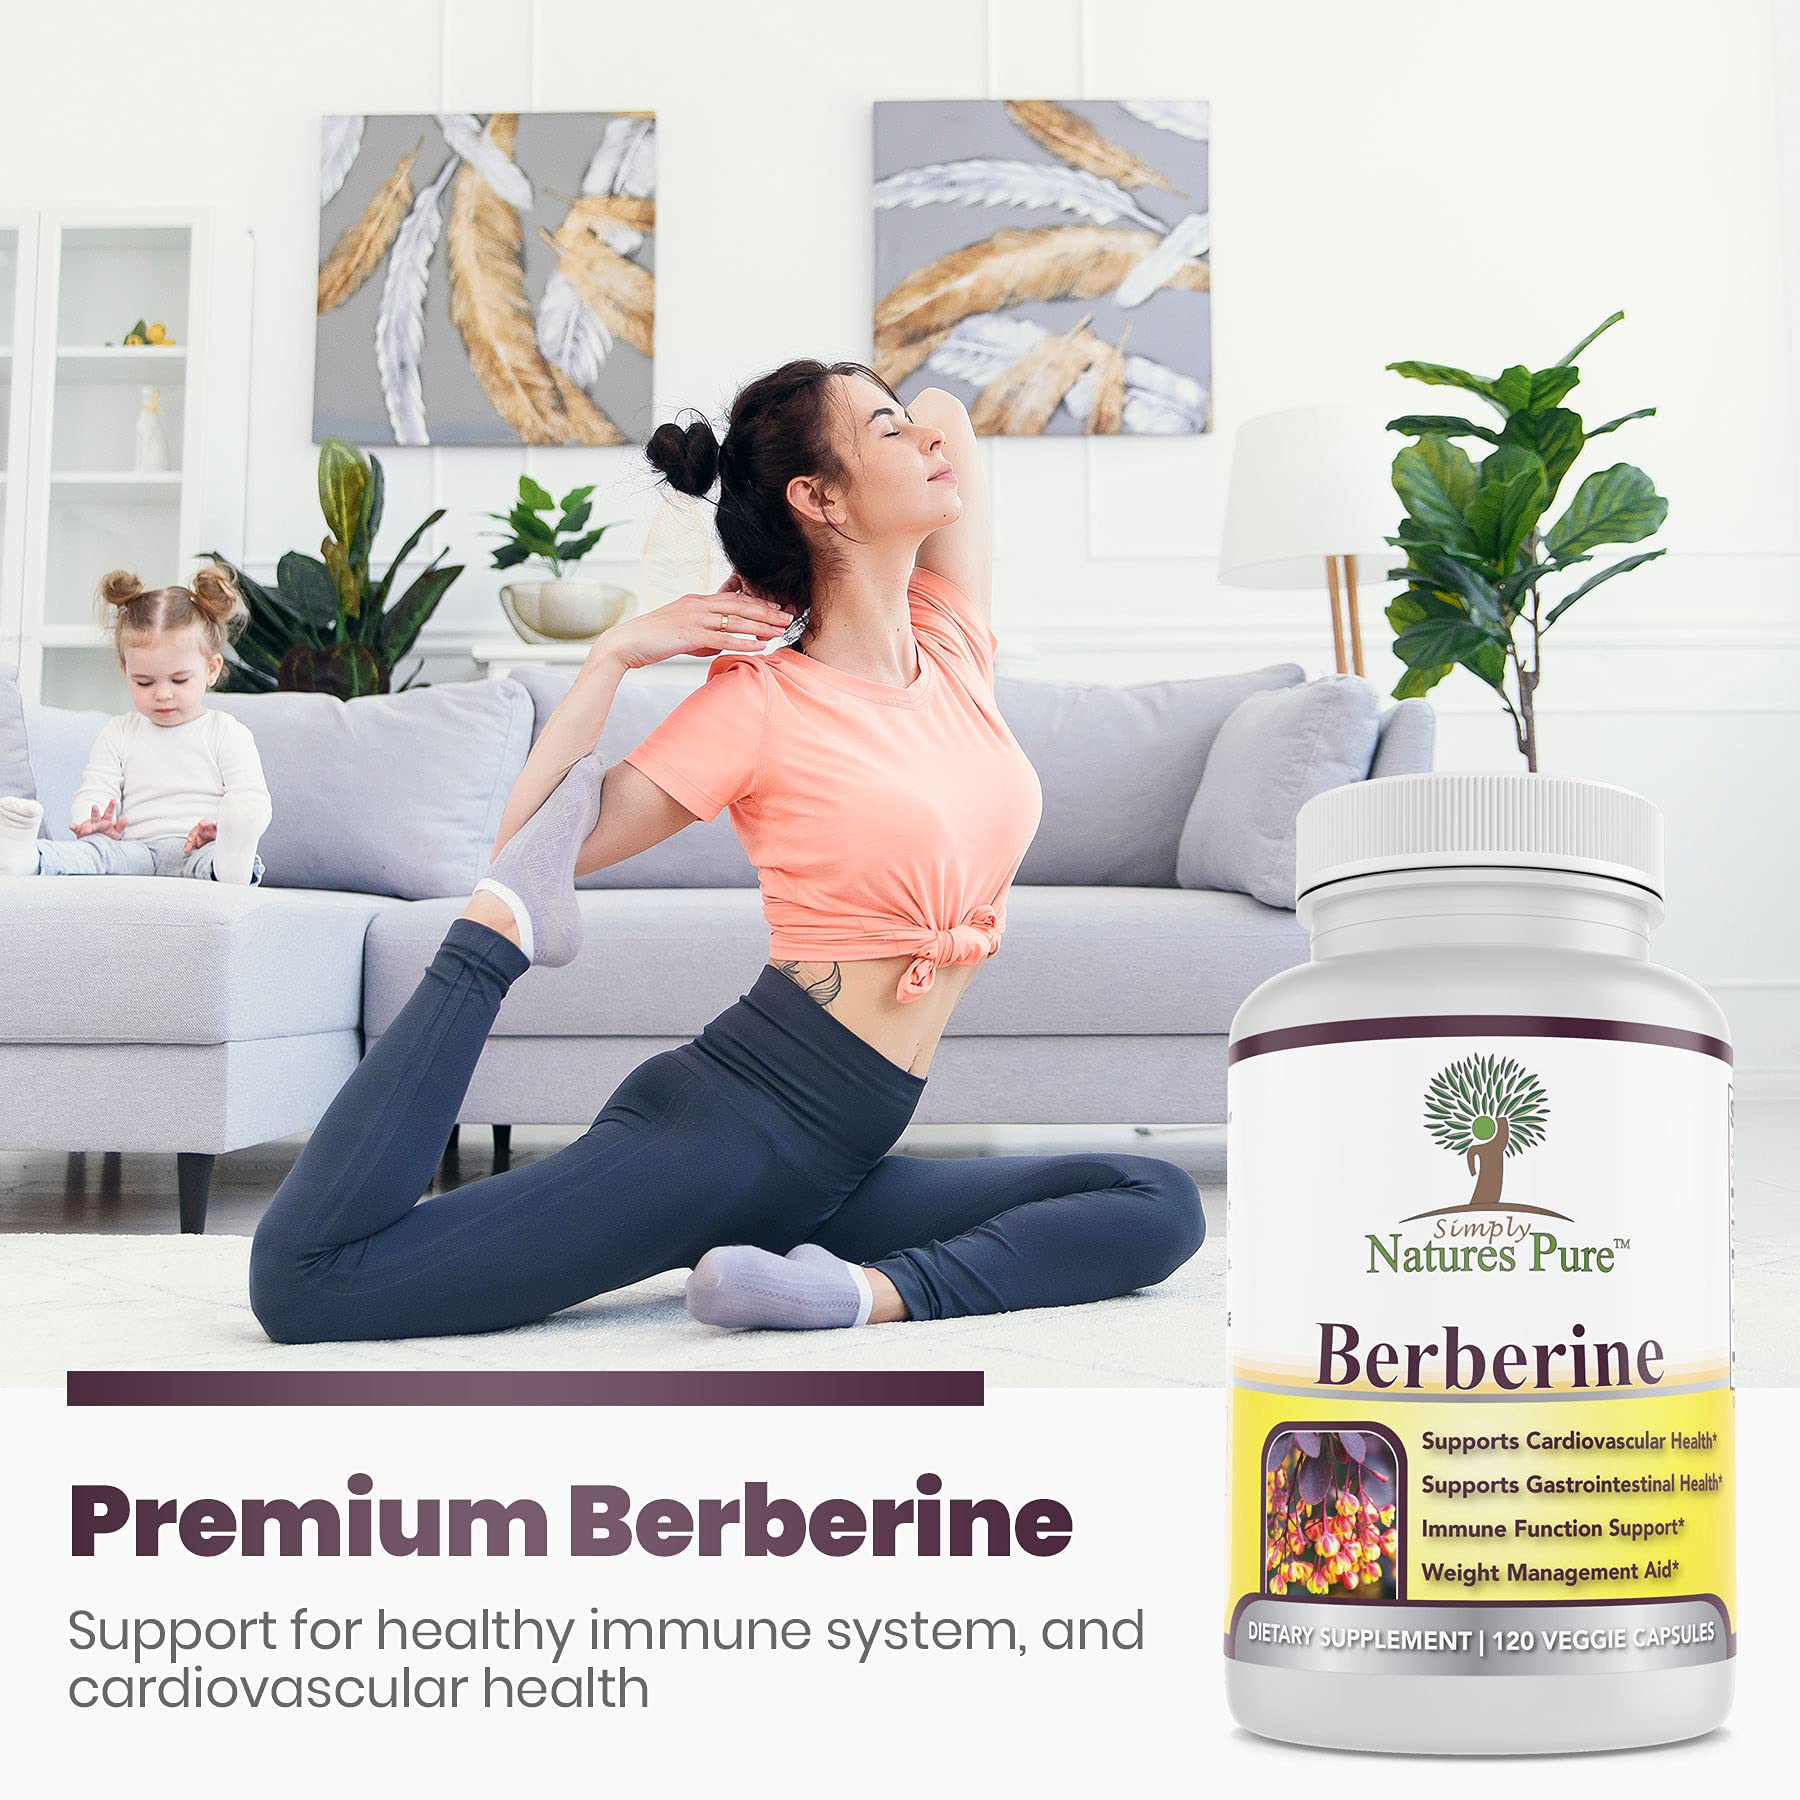 What else should you know about Nature's Pure Berberine?